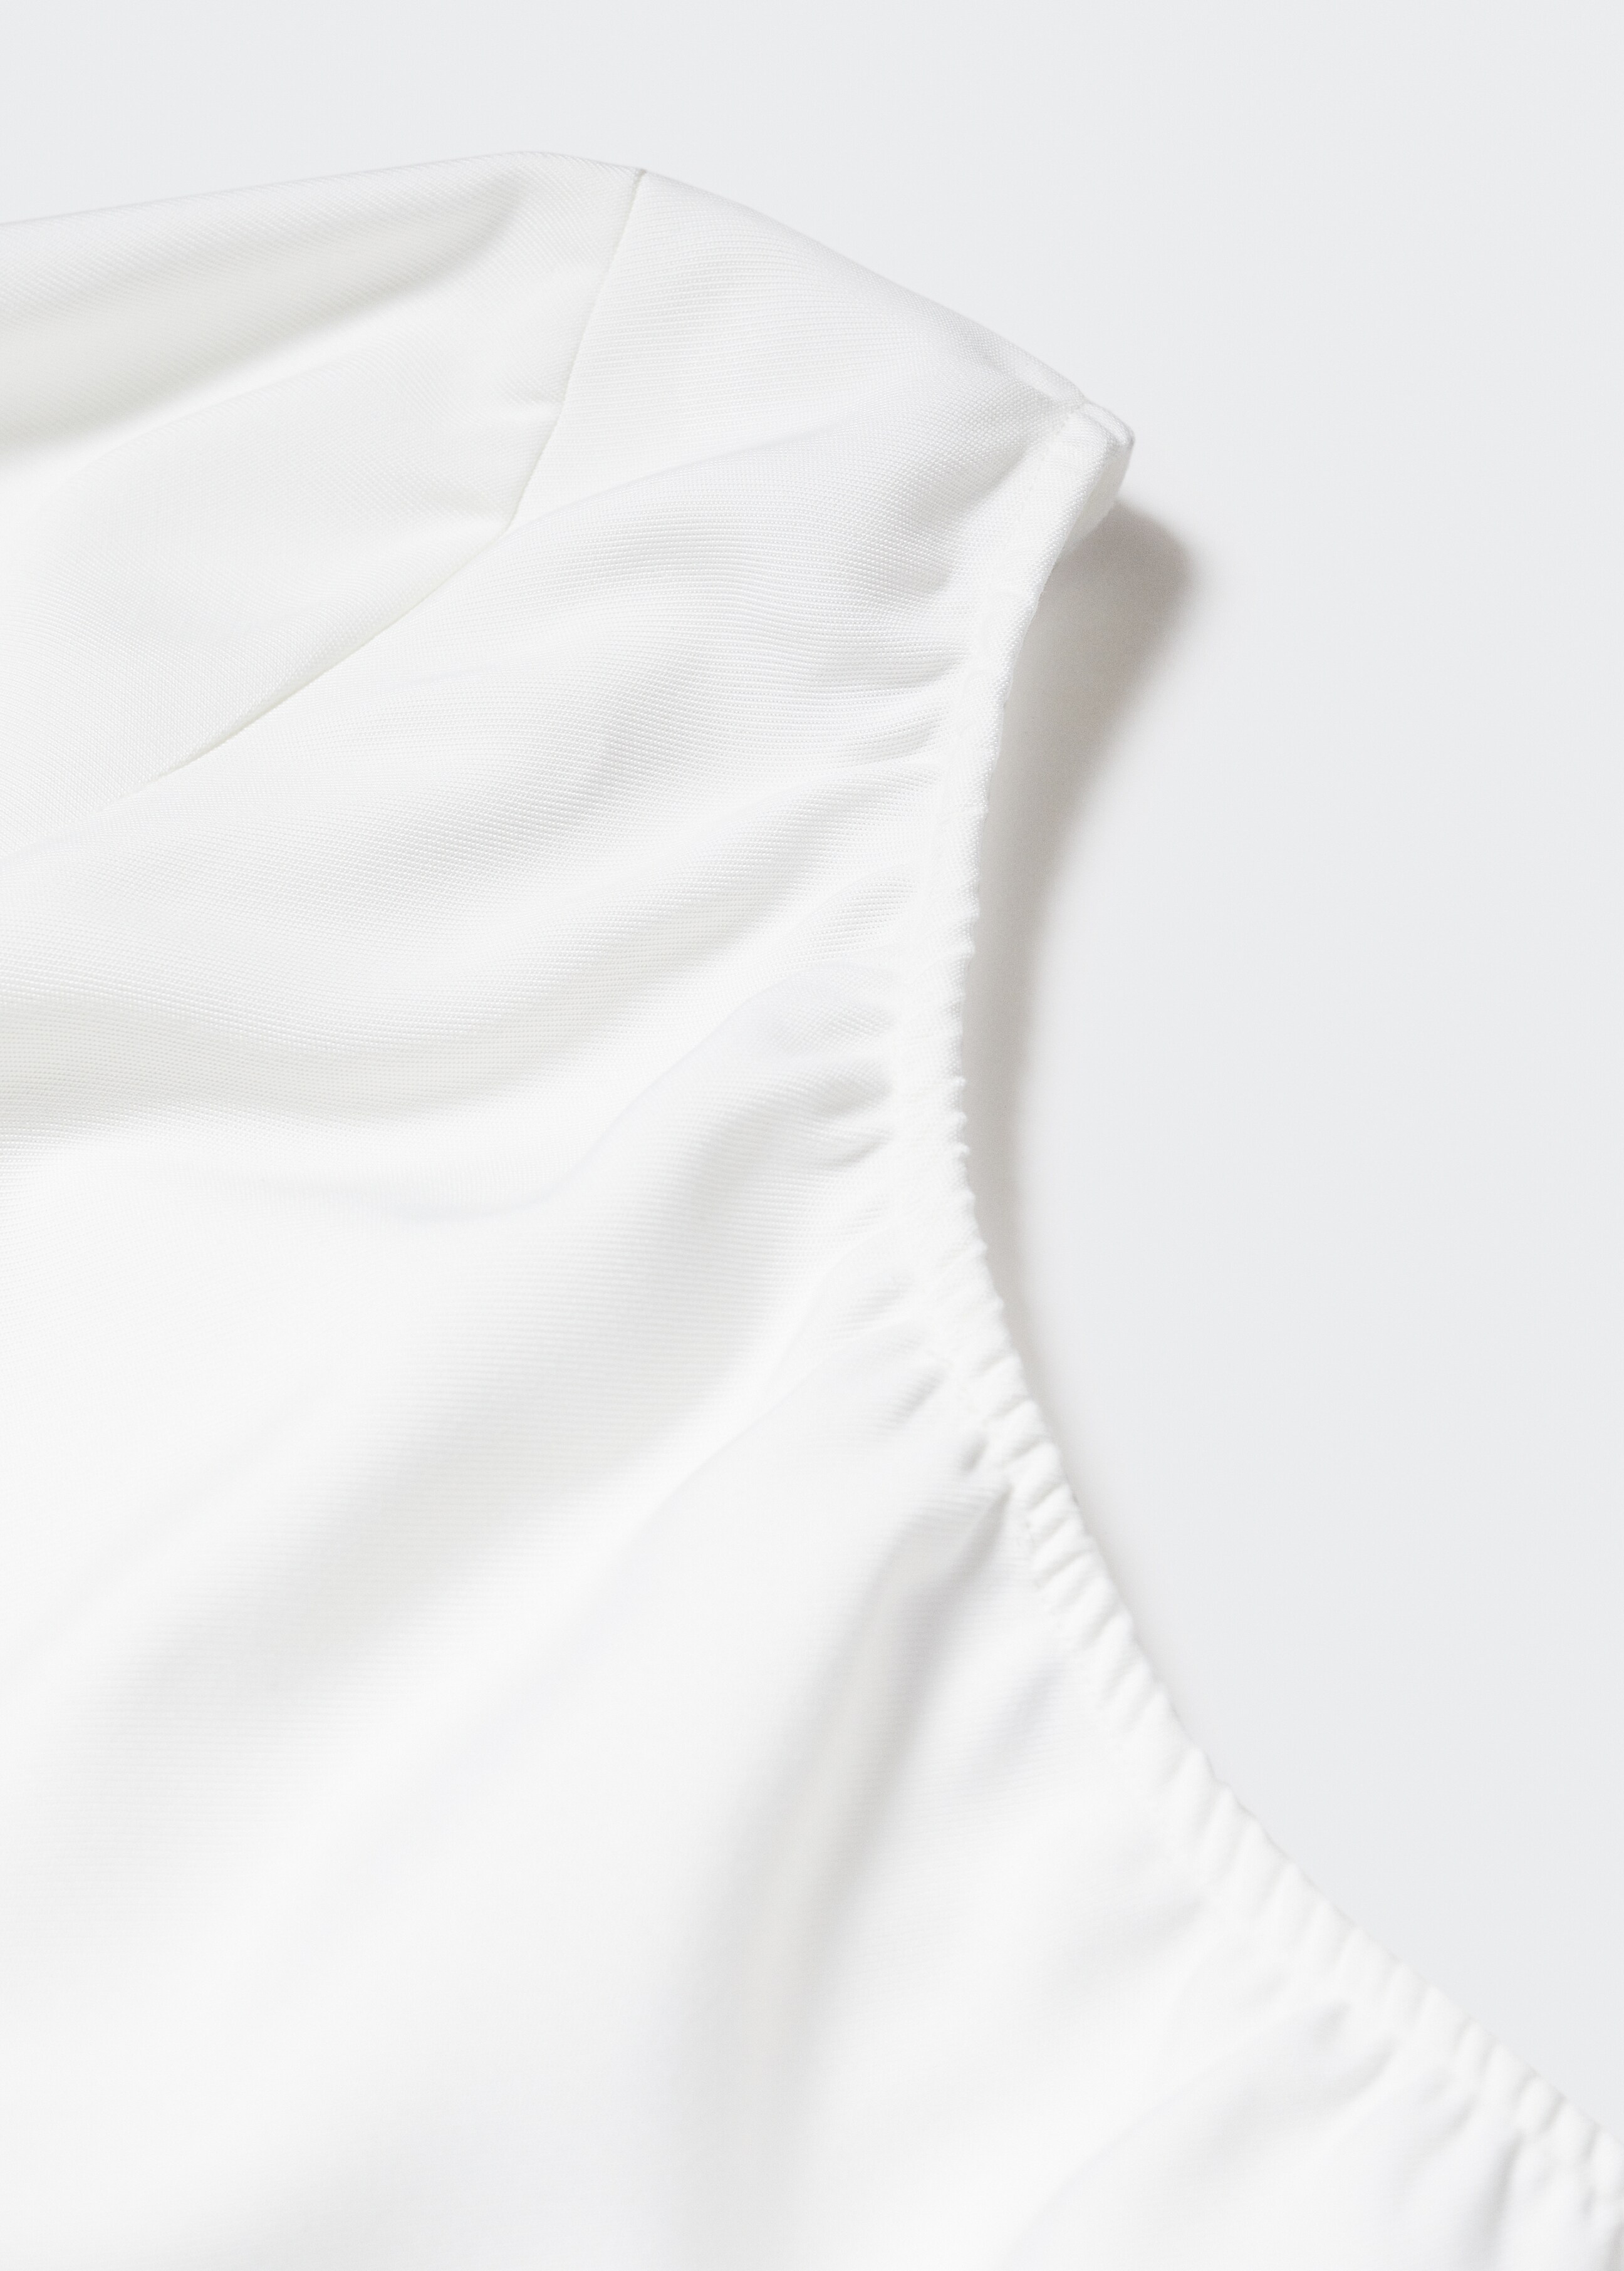 Asymmetrical blouse - Details of the article 8